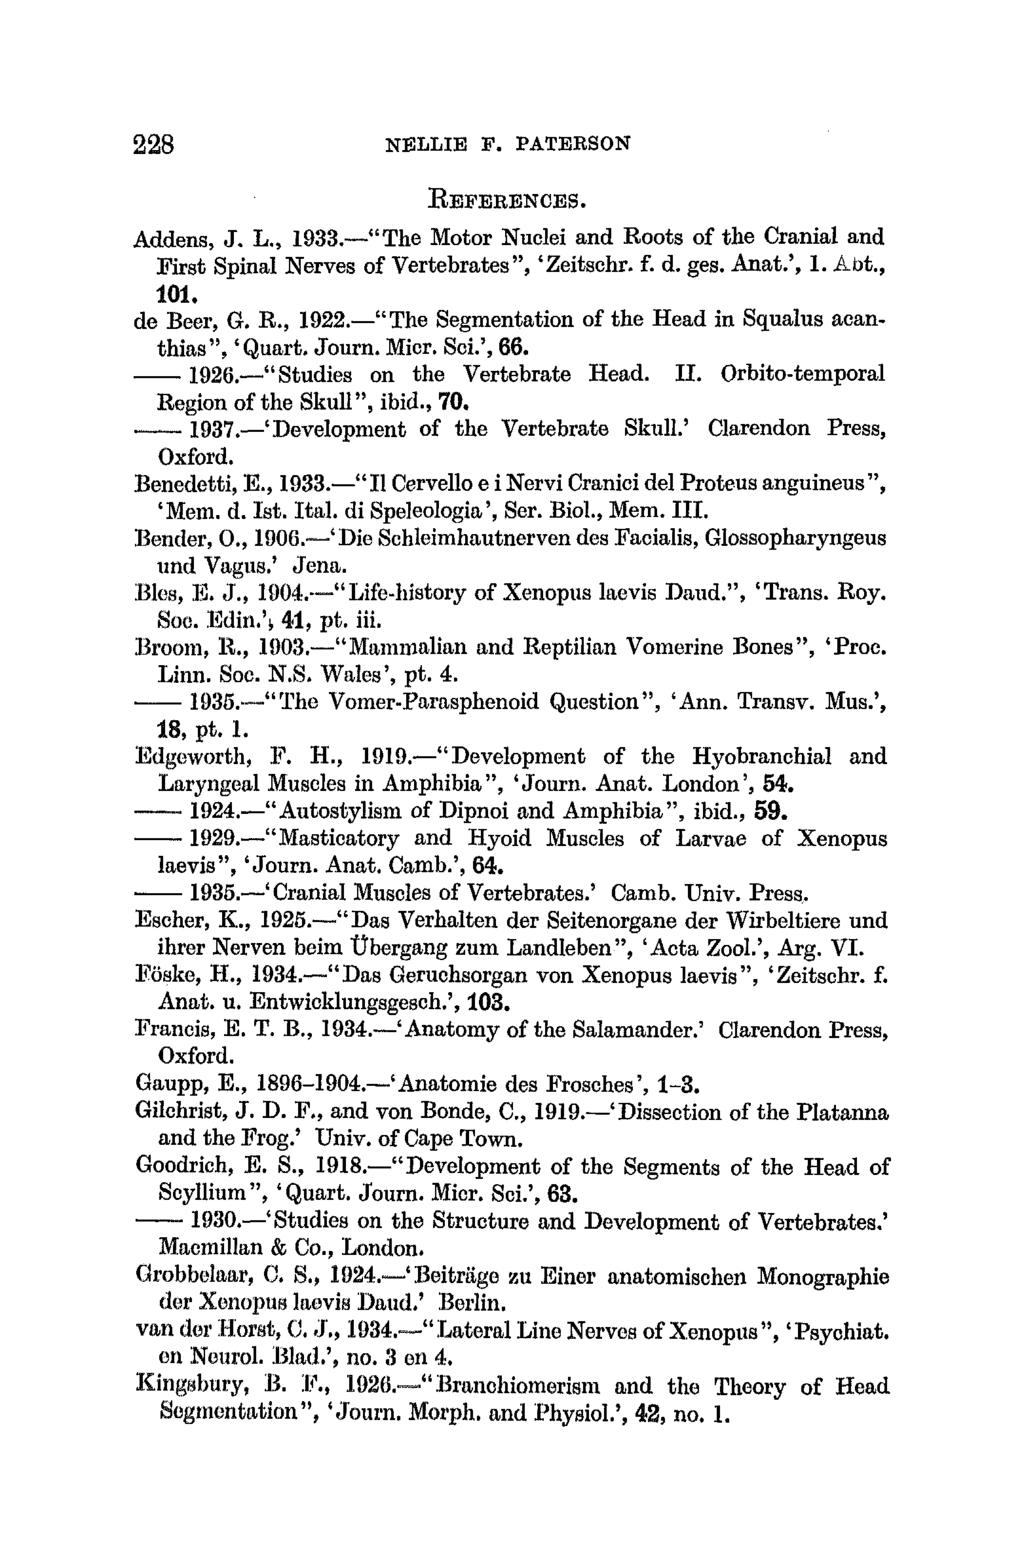 228 NELLIE F. PATEKSON BEFERENCES. Addens, J. L., 1933. "The Motor Nuclei and Roots of the Cranial and Krst Spinal Nerves of Vertebrates", 'Zeitsehr. f. d. ges. Anat.', 1. Abt., 101. de Beer, G. R., 1922.